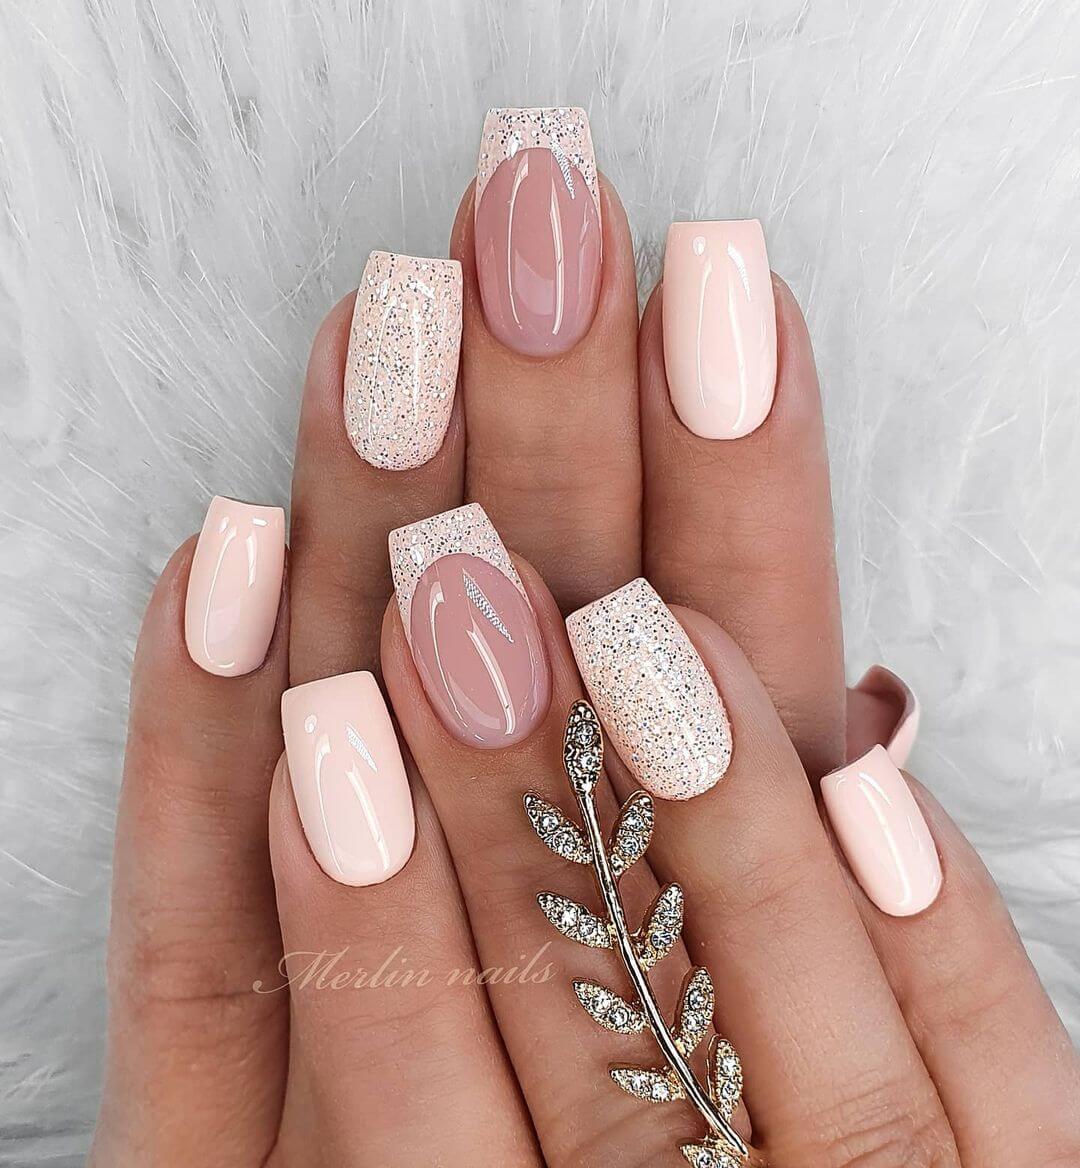 Pastel colours with glittery nail art